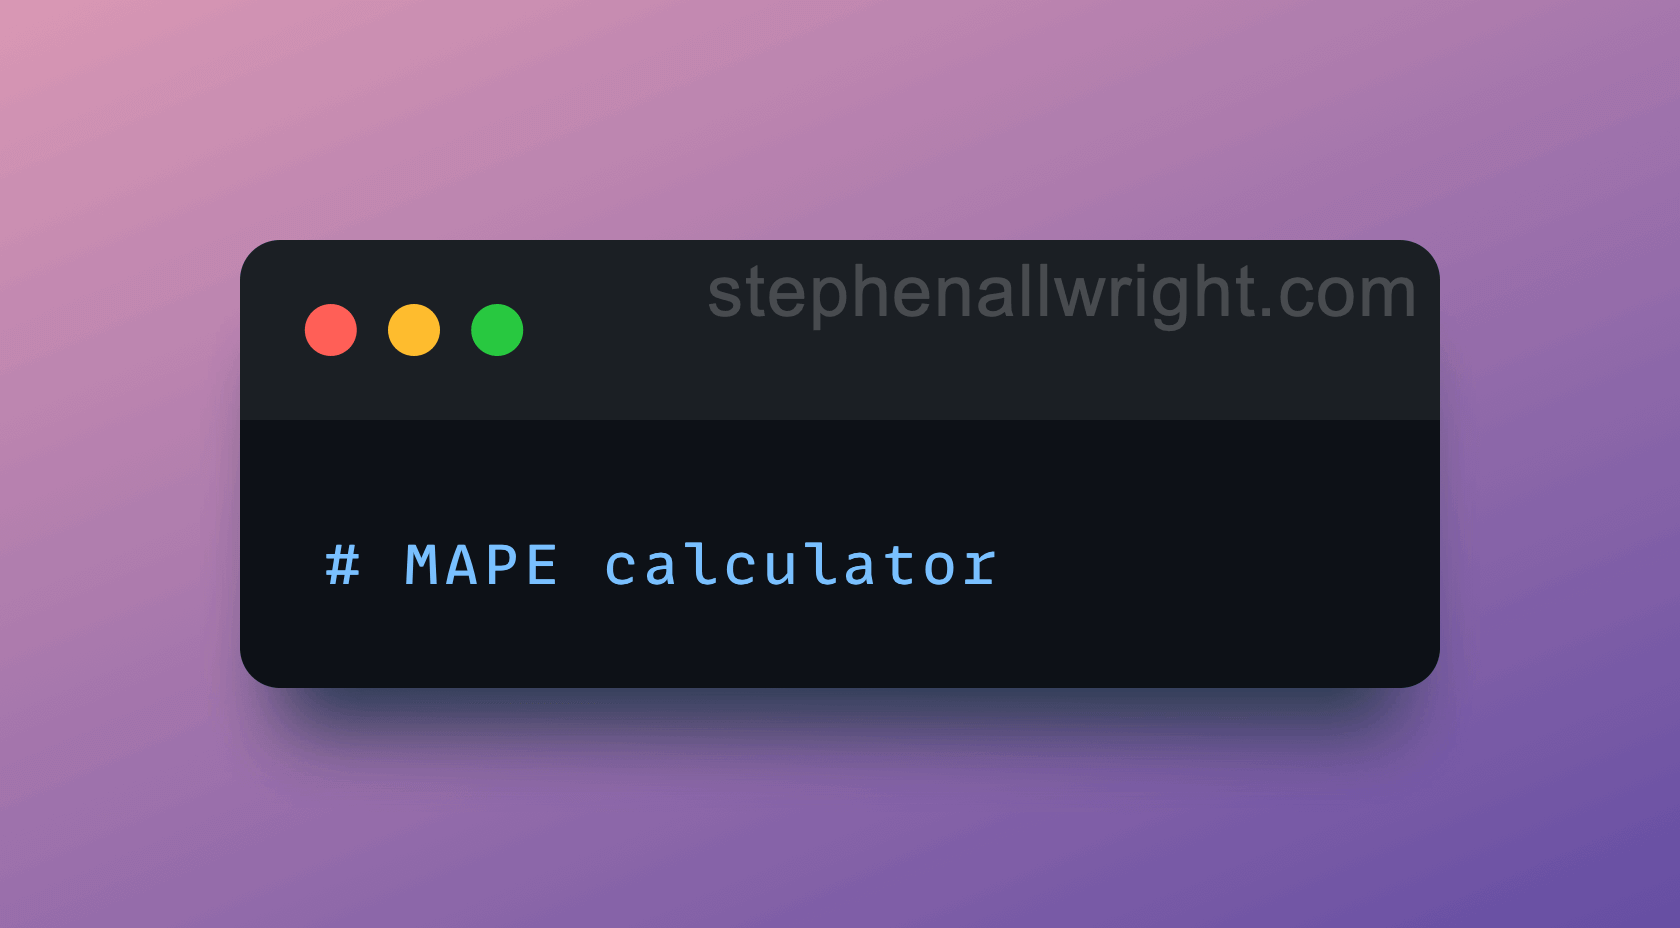 Simple online calculator for mape (mean absolute percentage error)